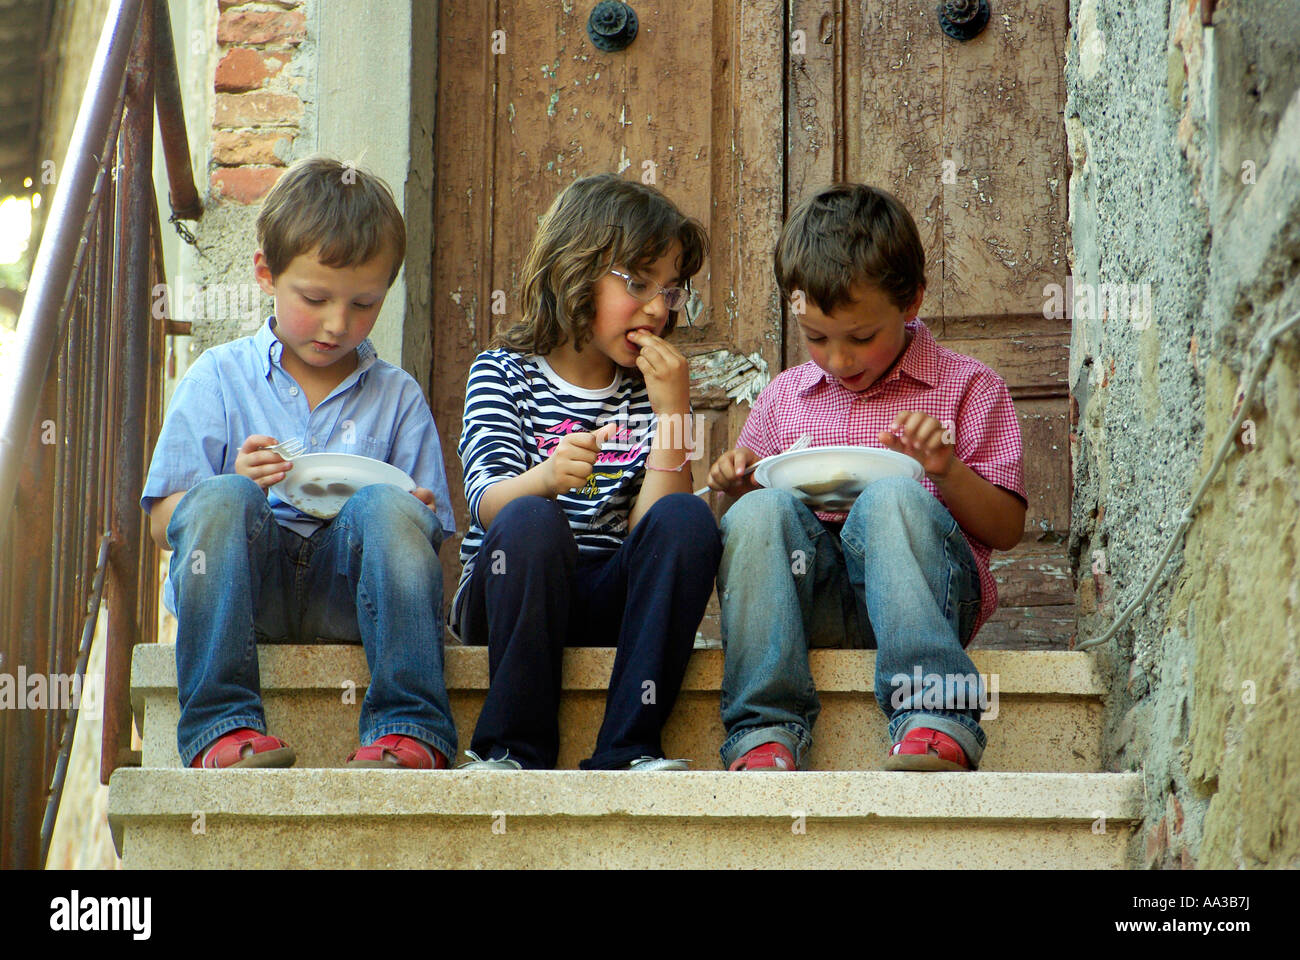 Three children eat cake from plastic plates on steps in rural Italy Stock Photo